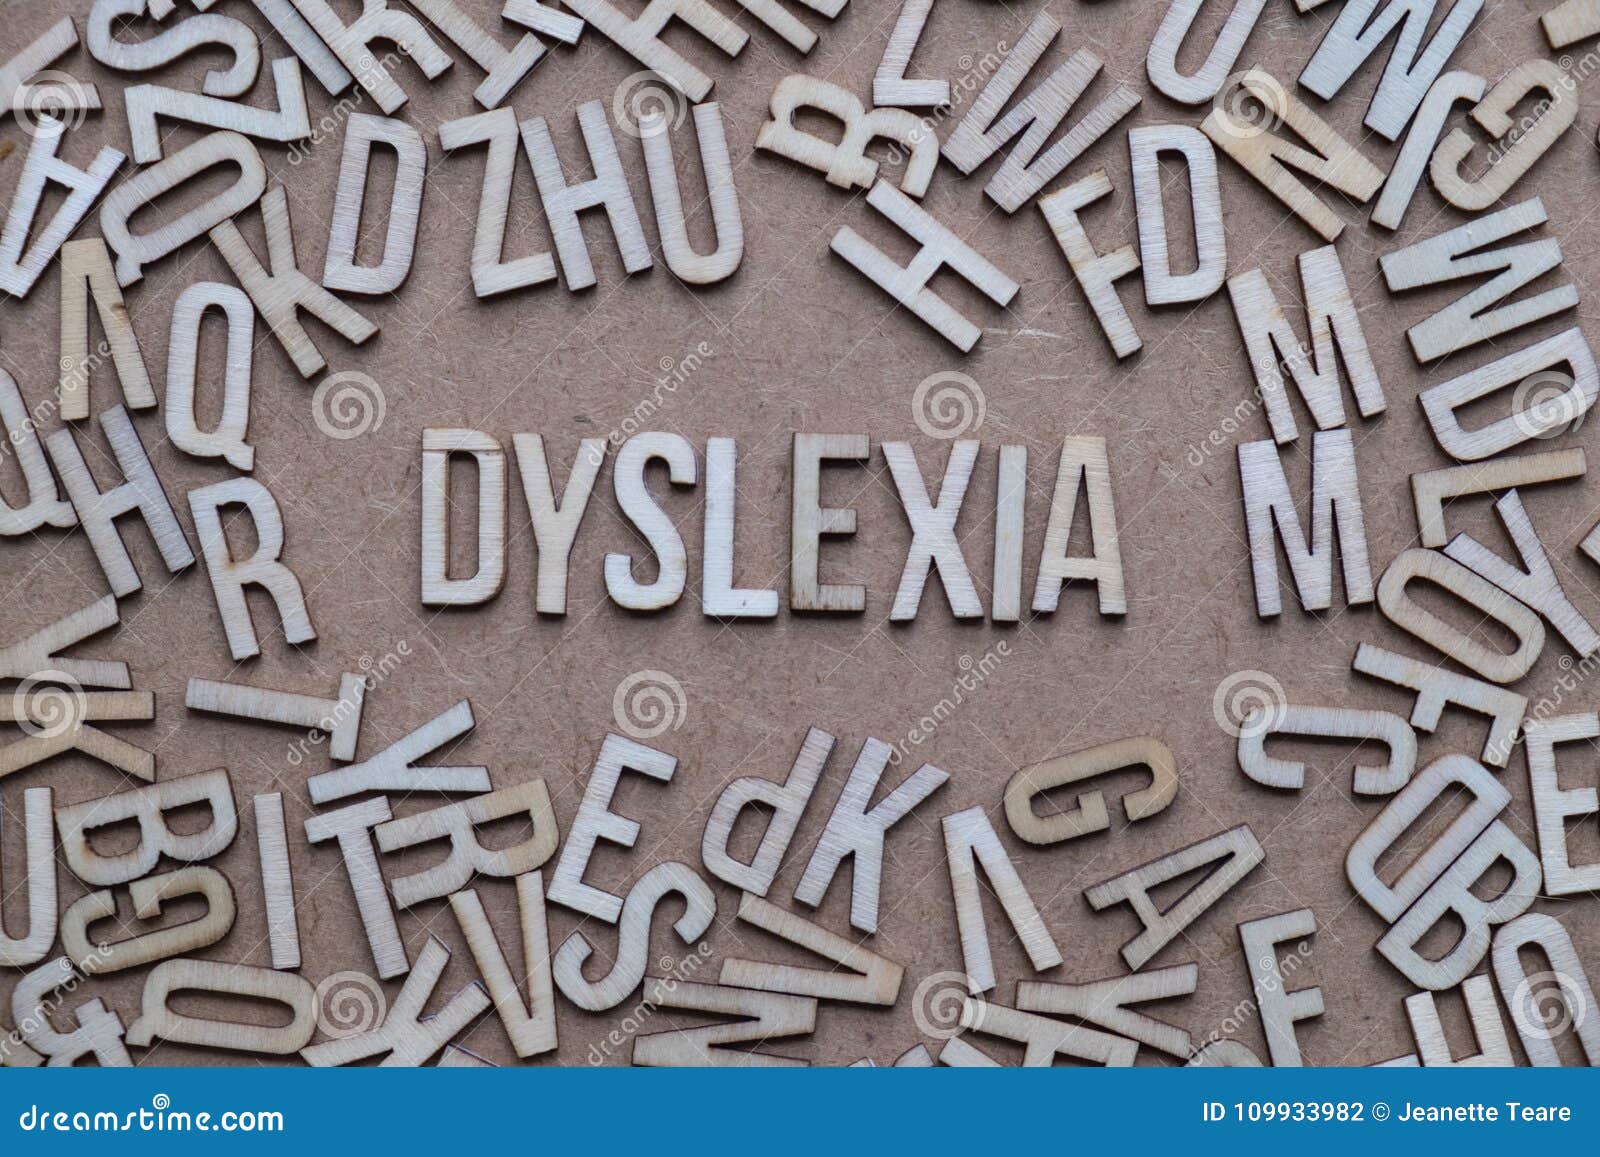 Dyslexia Concept, Word Spelled Out In Wooden Letters Stock Photo